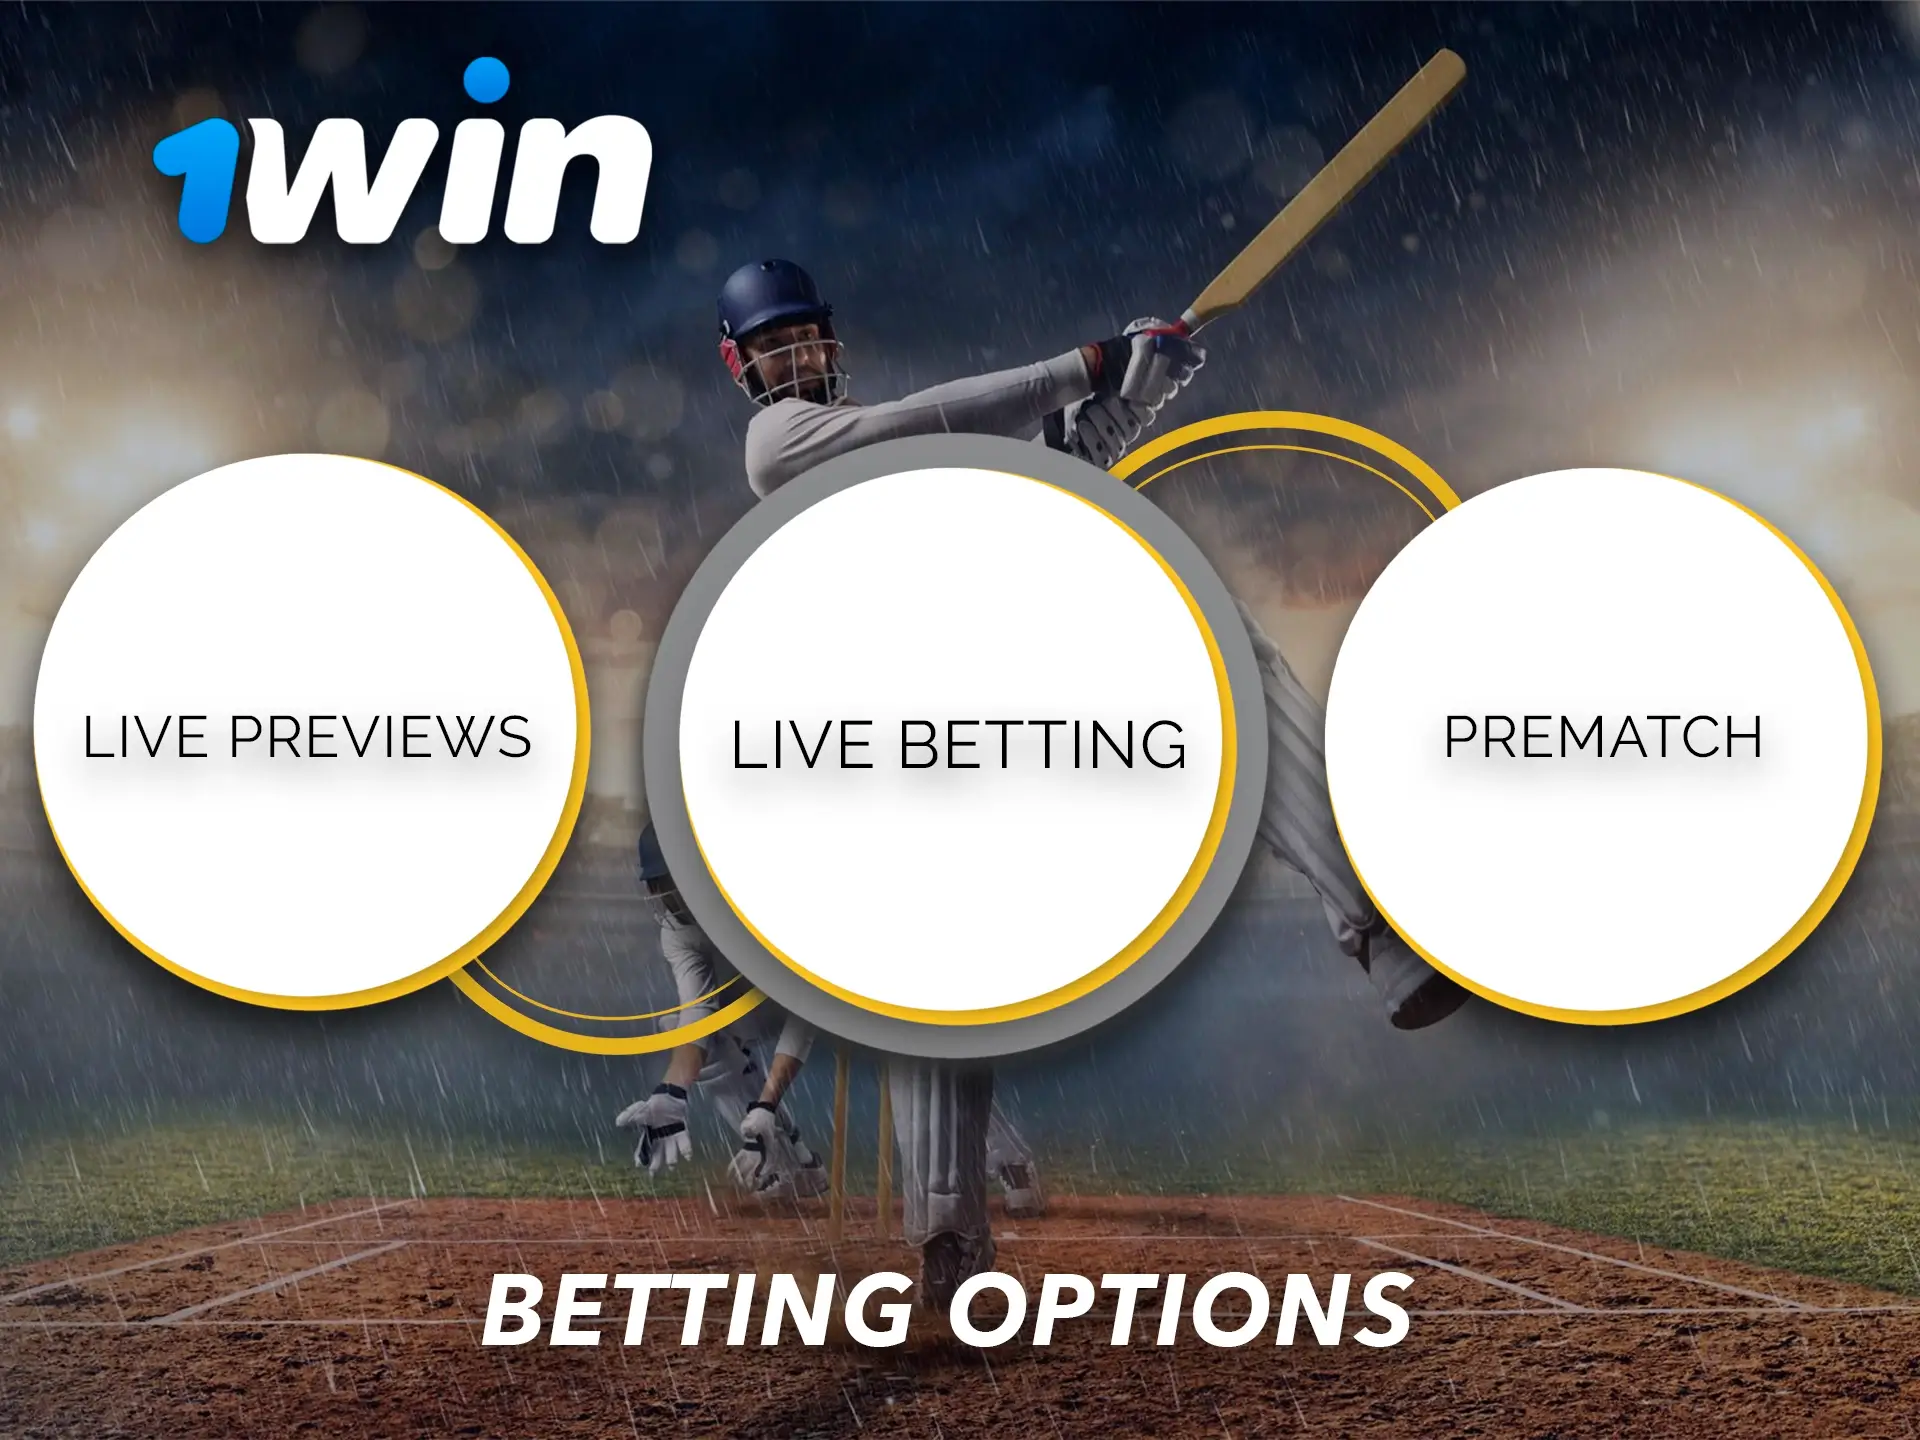 There are 3 betting options available for you from 1Win to win big.